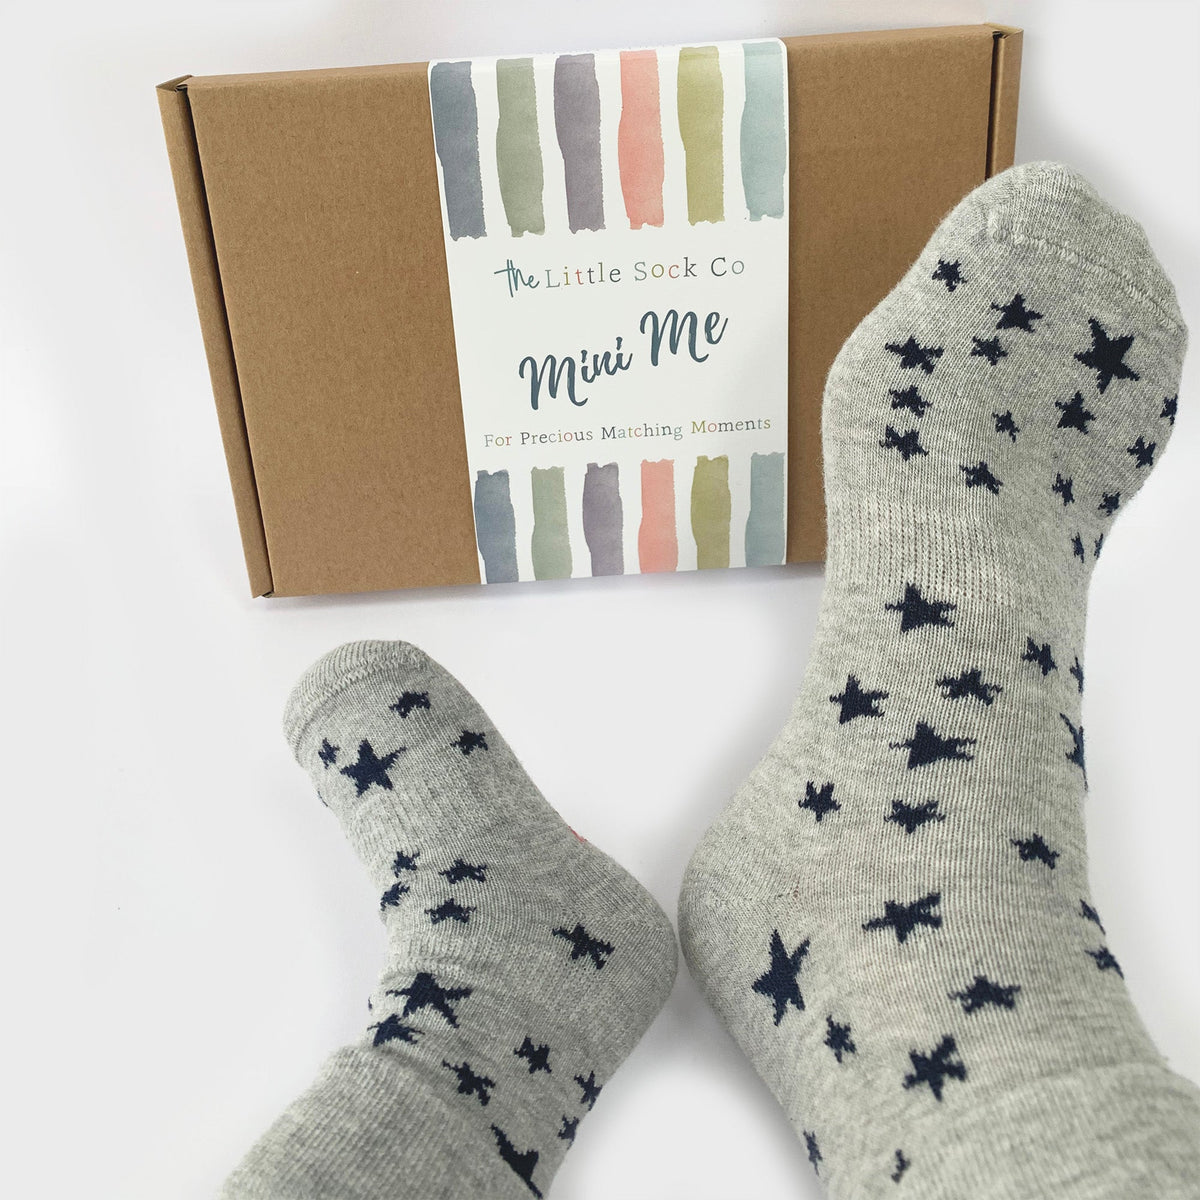 Personalised Mini Me Matching Adult and Child Family Socks Gift Set in Stars ⭐️ - The Perfect Personalised Gift for Birthdays or Grandparents Day